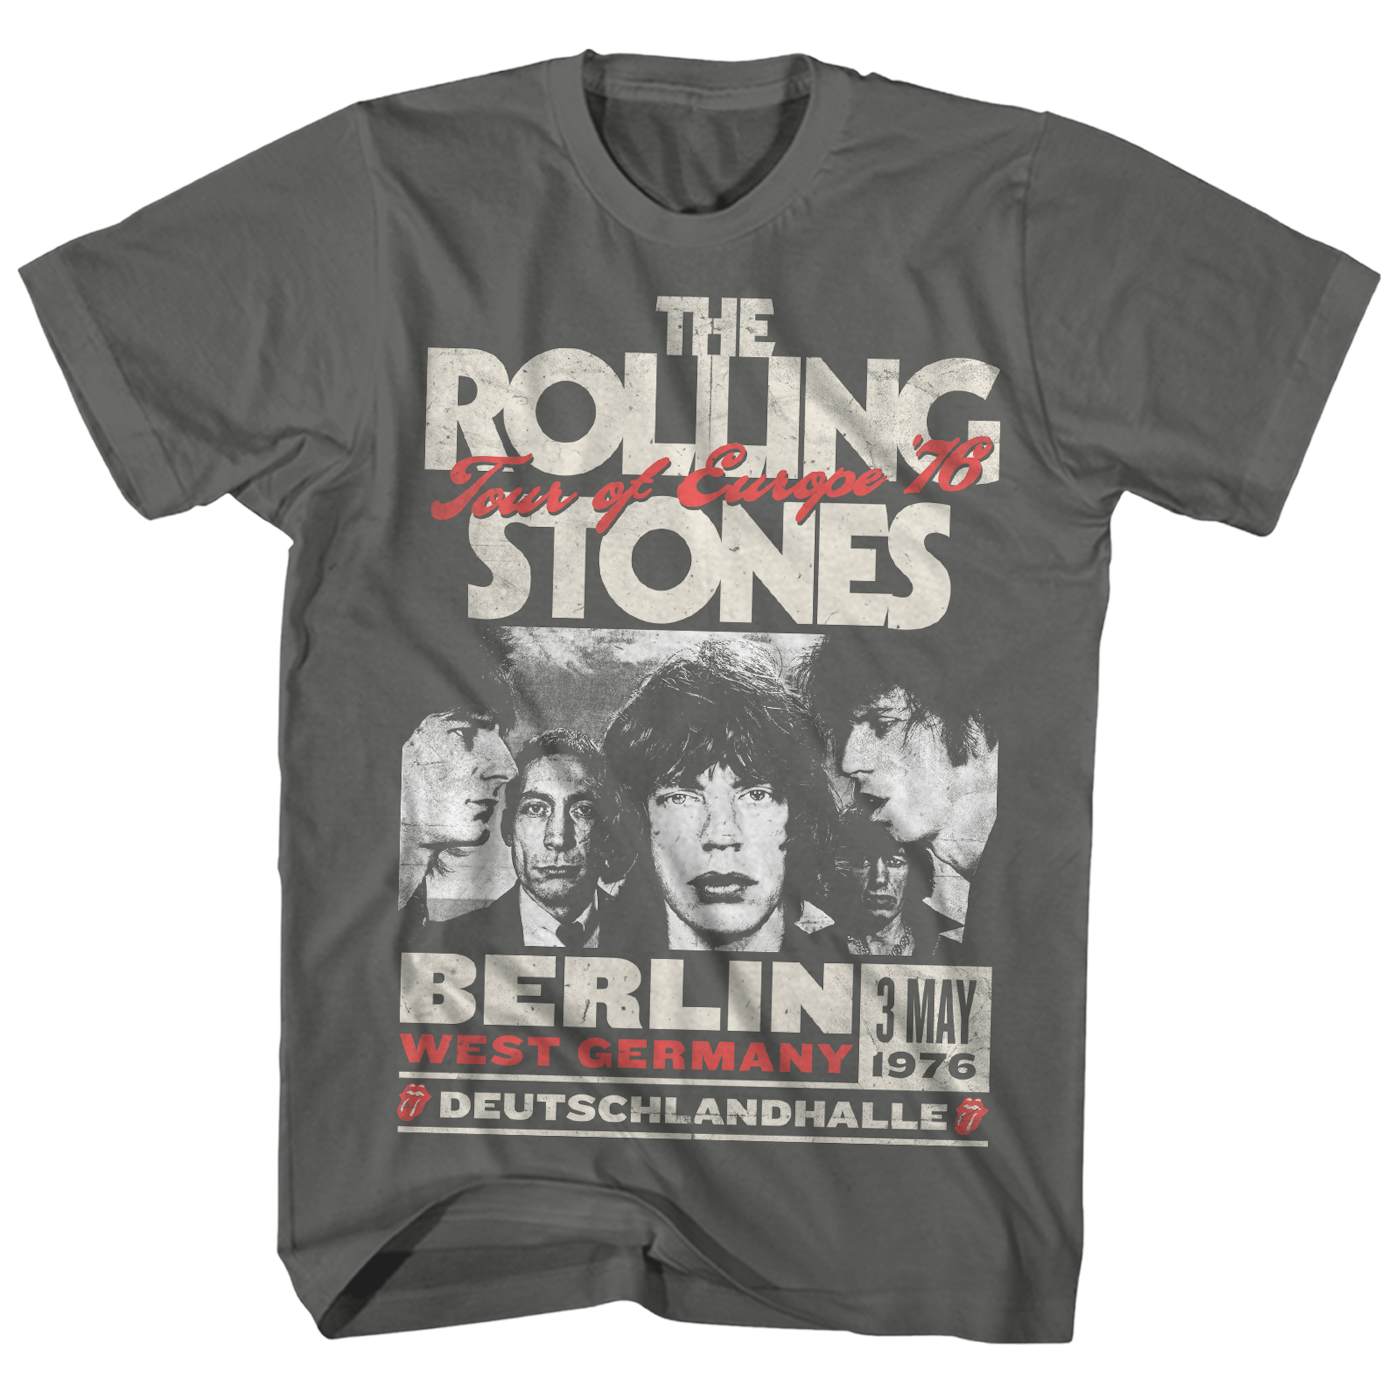 The Rolling The Tongue Classic Rolling Distressed Logo Stones Stones | Shirt T-Shirt \'89